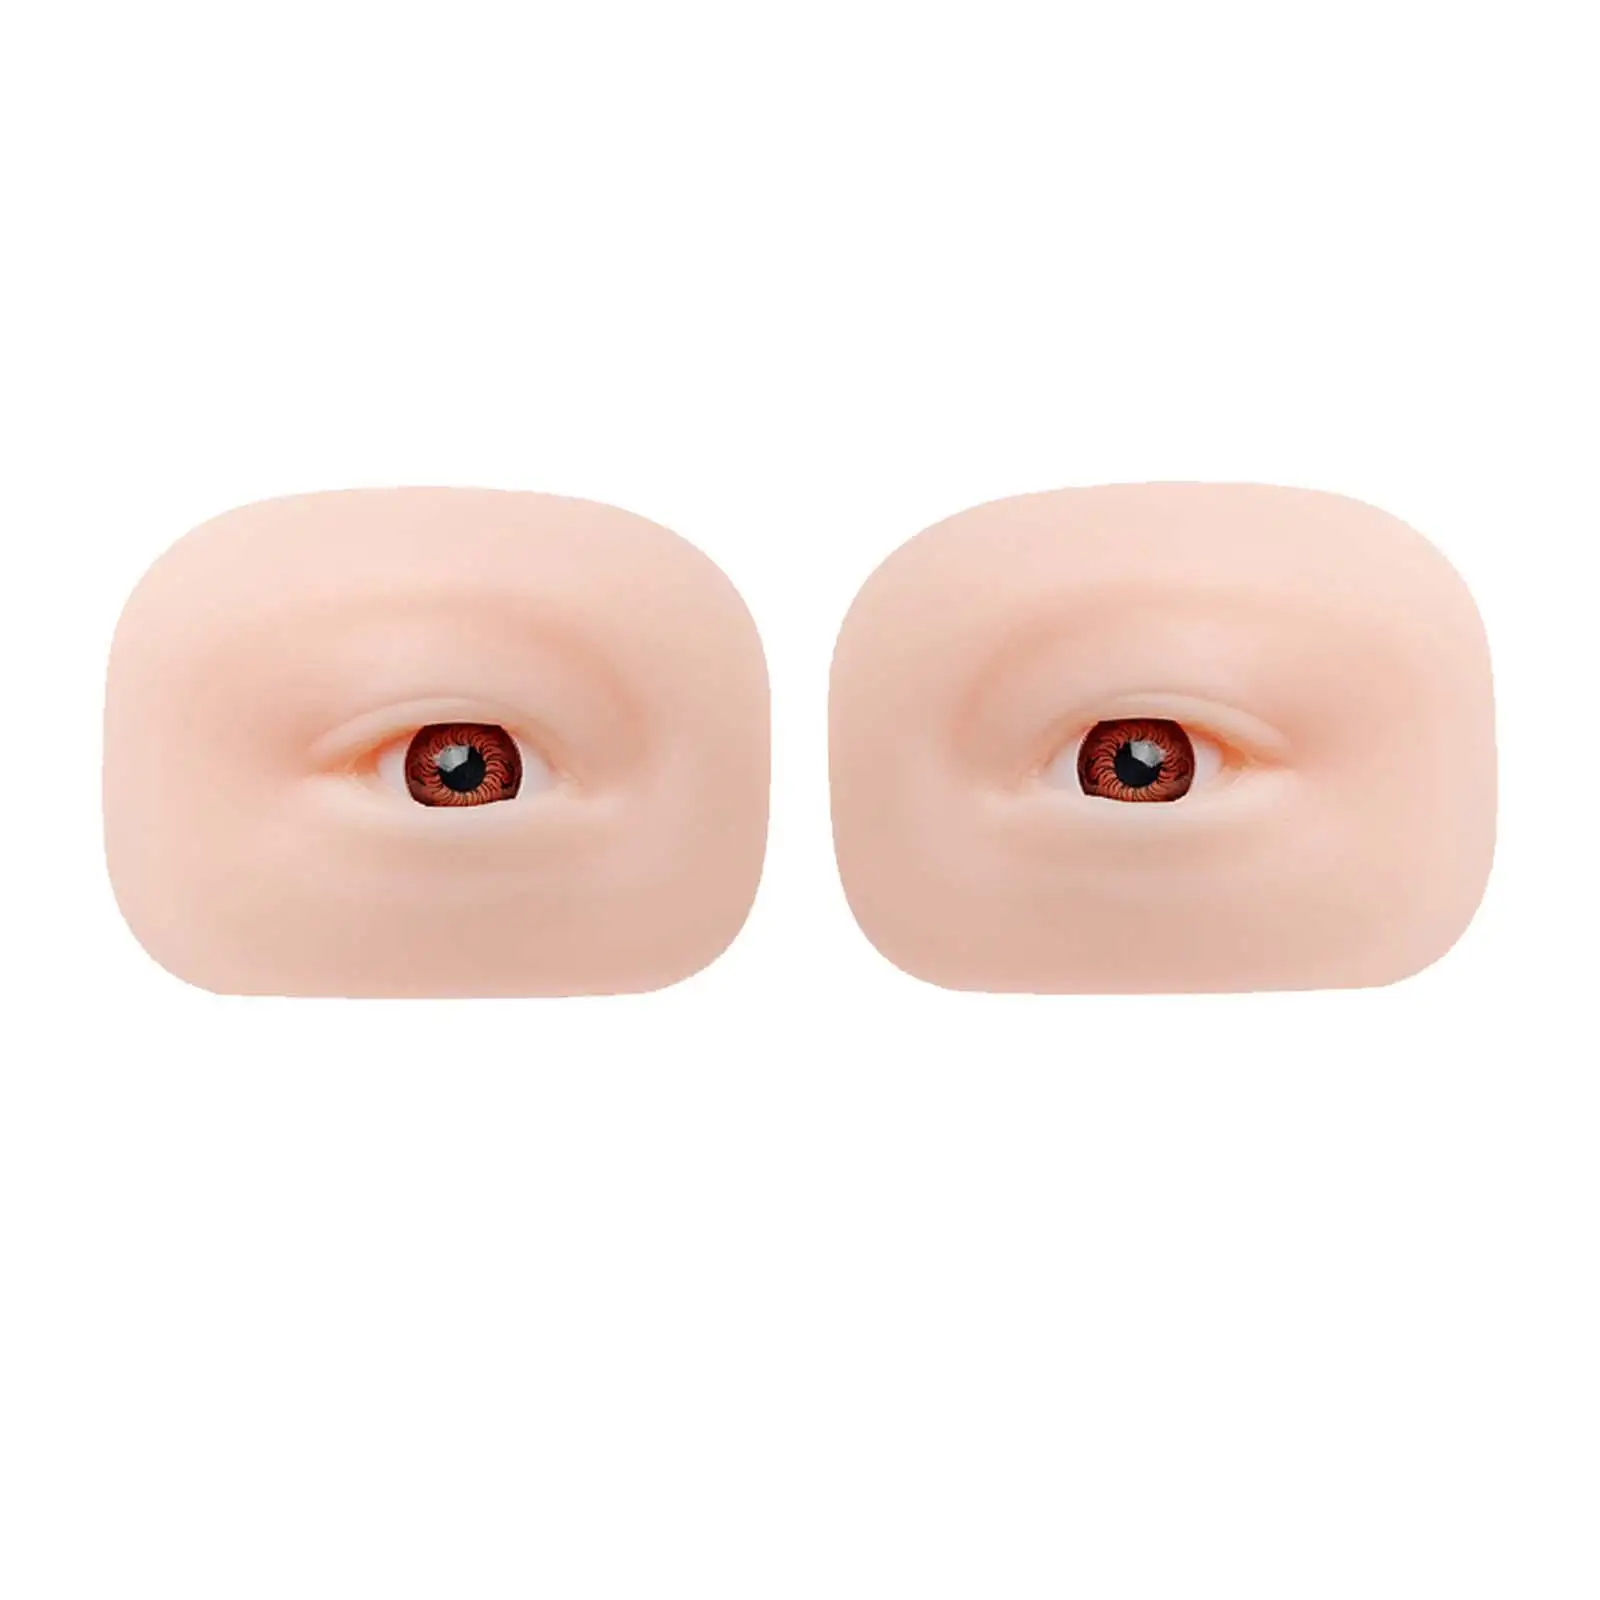 5D Silicone Eye Model Portable Resuable for Beginners Makeup Training Salon